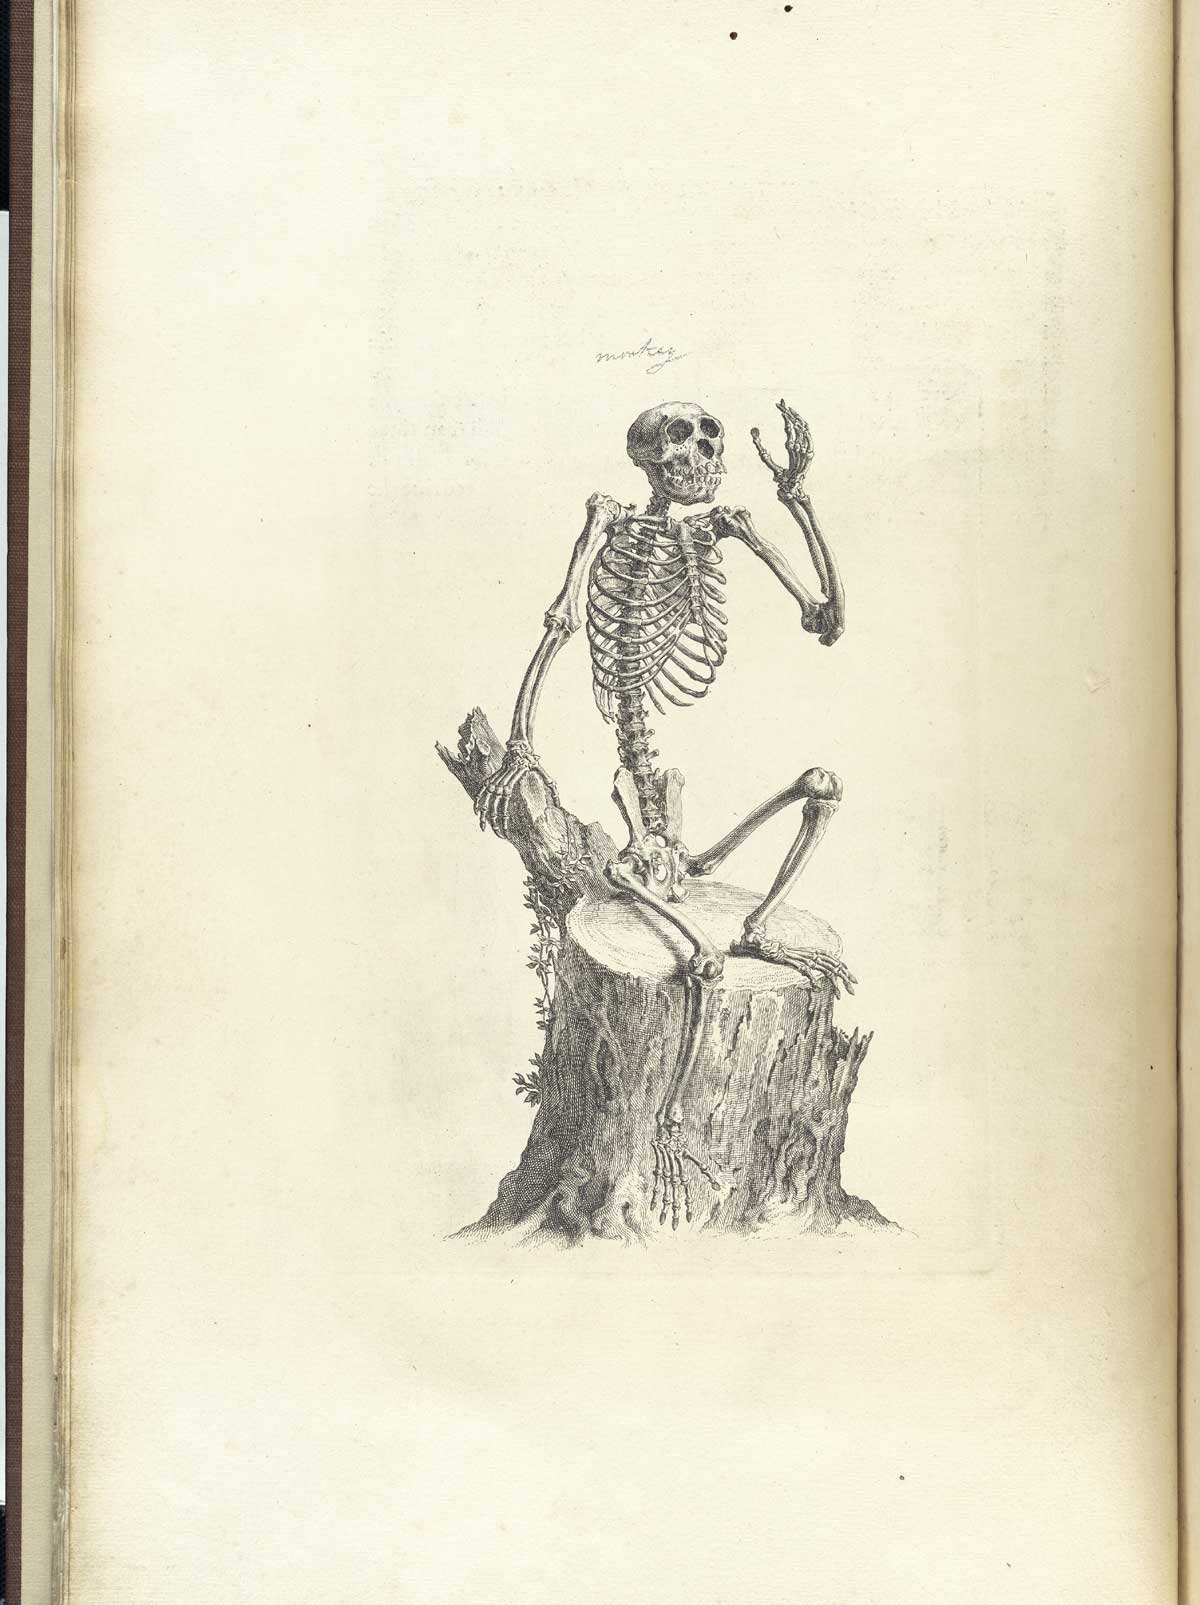 Engraving of a monkey skeleton facing forward recumbent upon a tree stump with right hand propping up the body on a tree branch and left hand raised to the sky as if in thought, from William Cheselden’s Osteographia, NLM Call no.: WZ 260 C499o 1733.